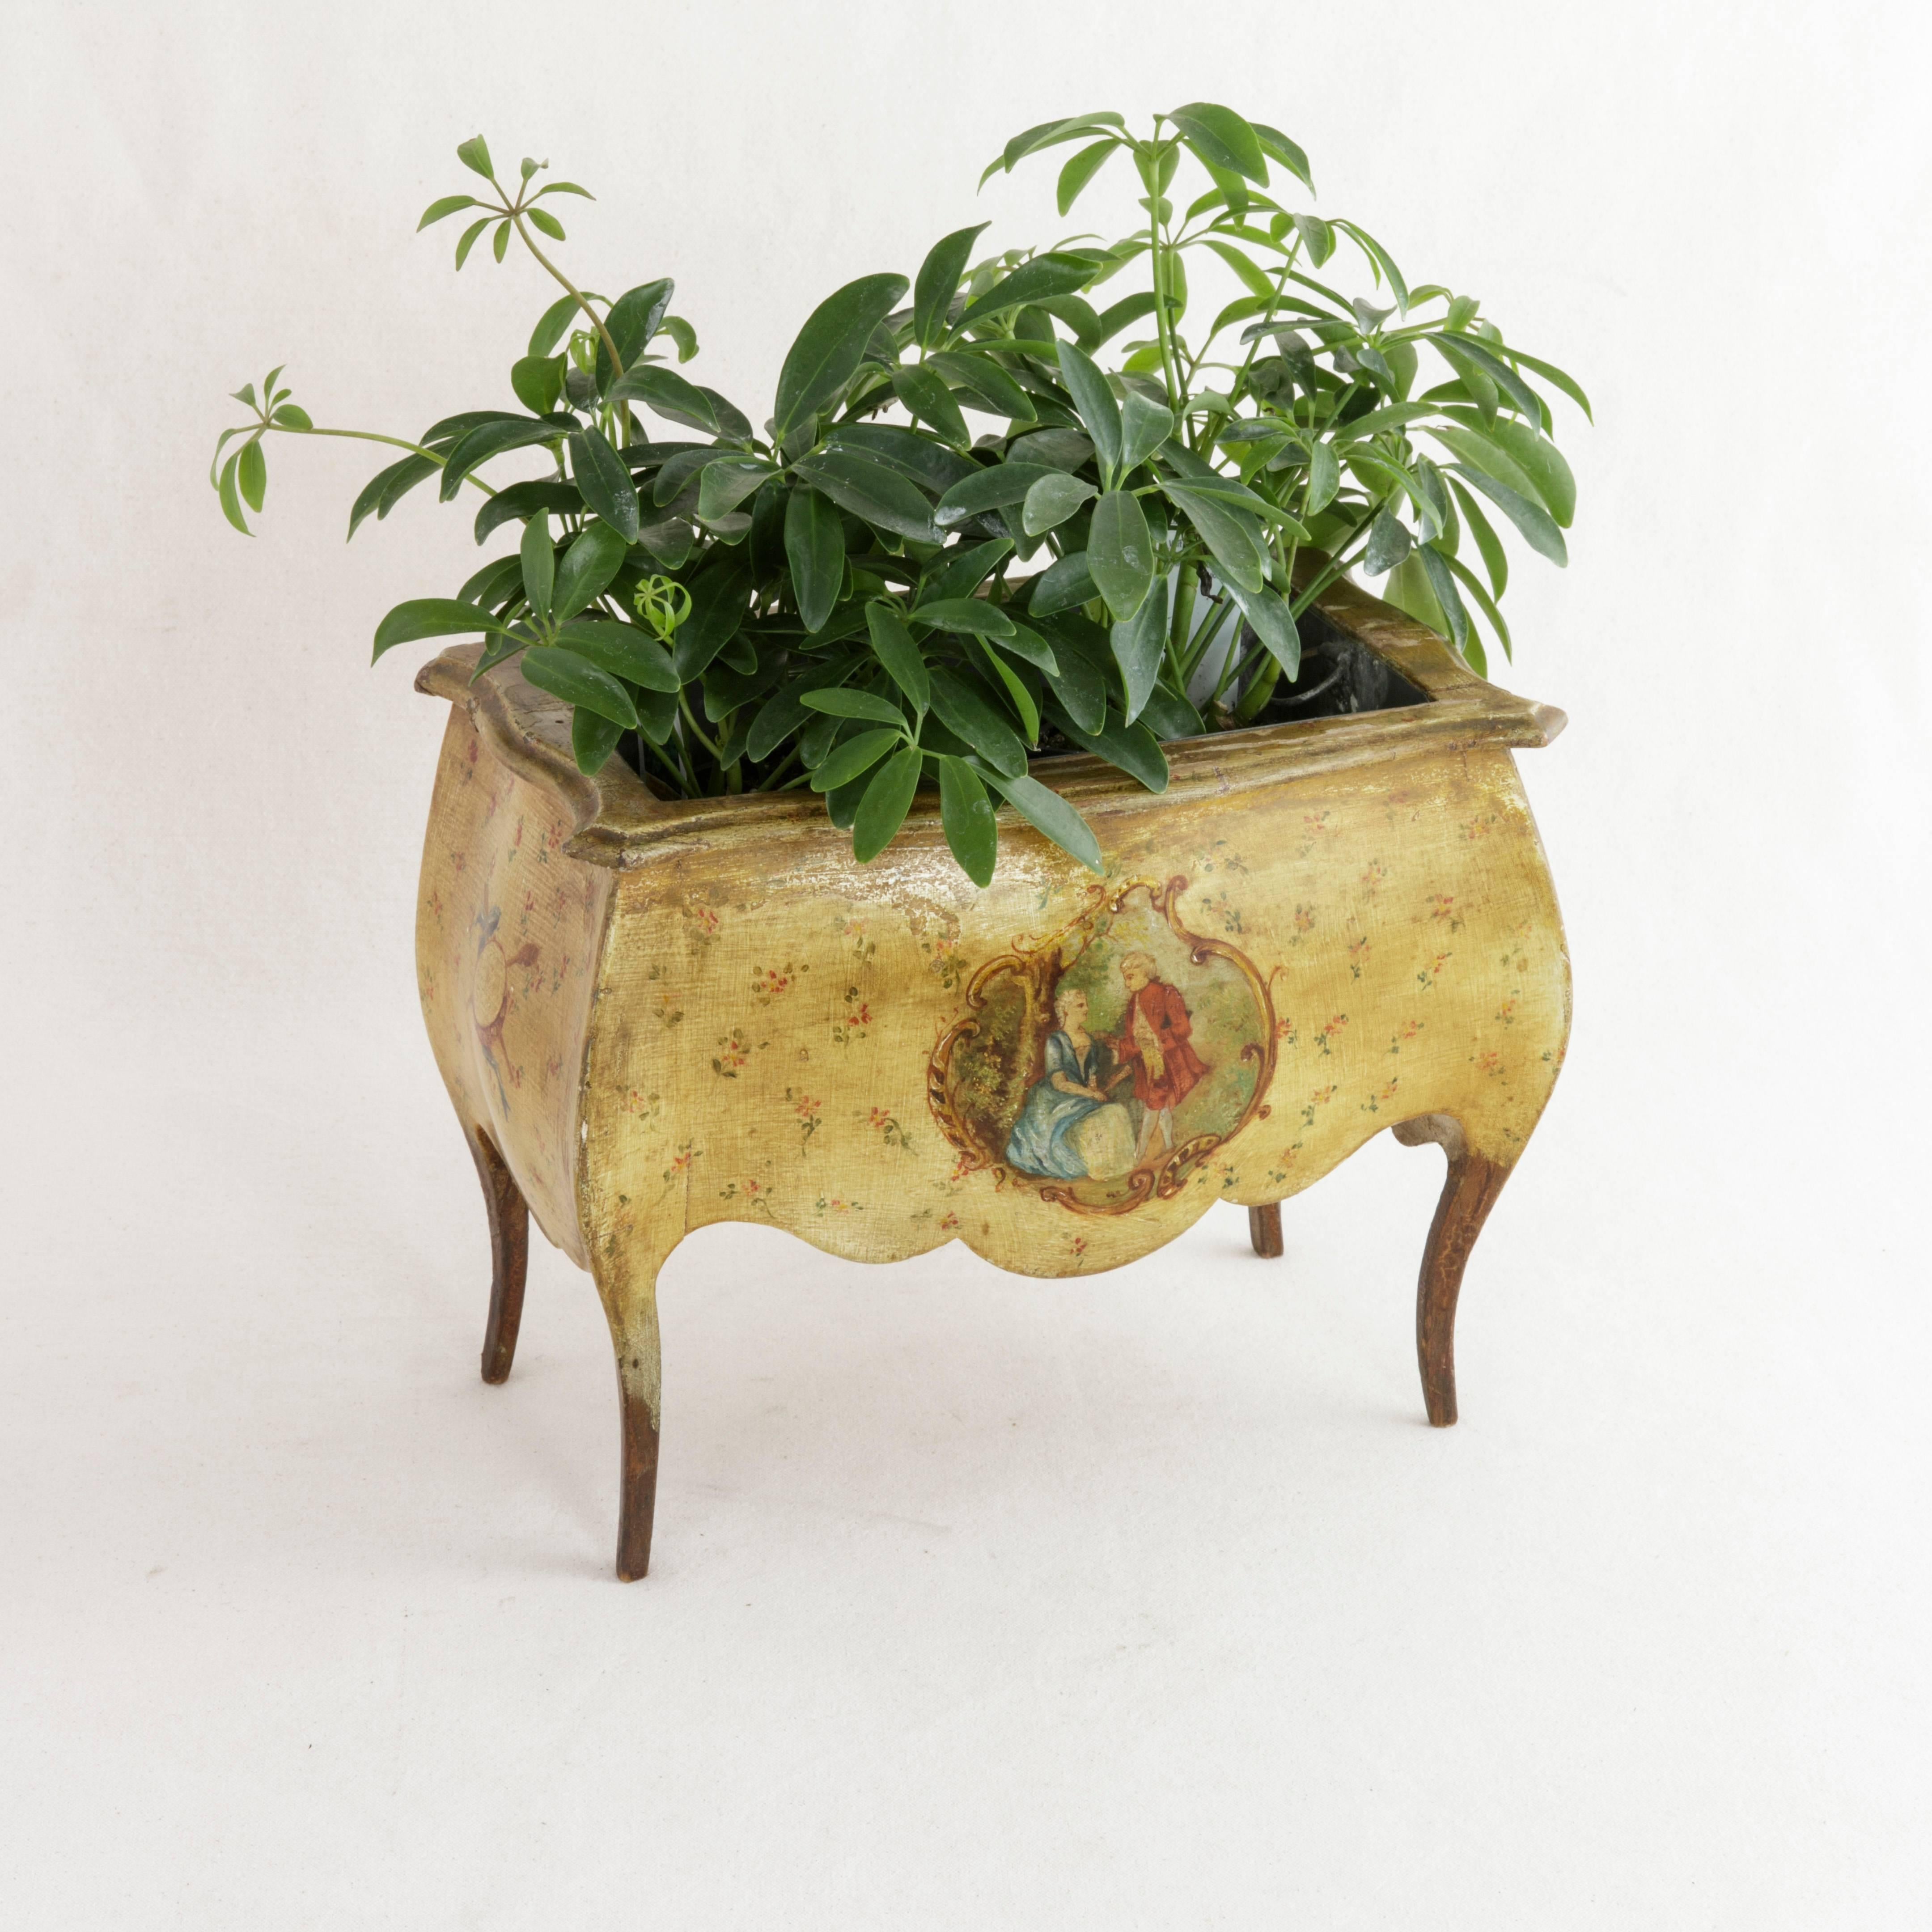 This late 19th century hand-painted tole jardinière or cachepot stands gracefully on Louis XV cabriolet legs and still holds its original removable zinc liner. Tiny flowers on a yellow field provide the backdrop of an 18th century courting scene